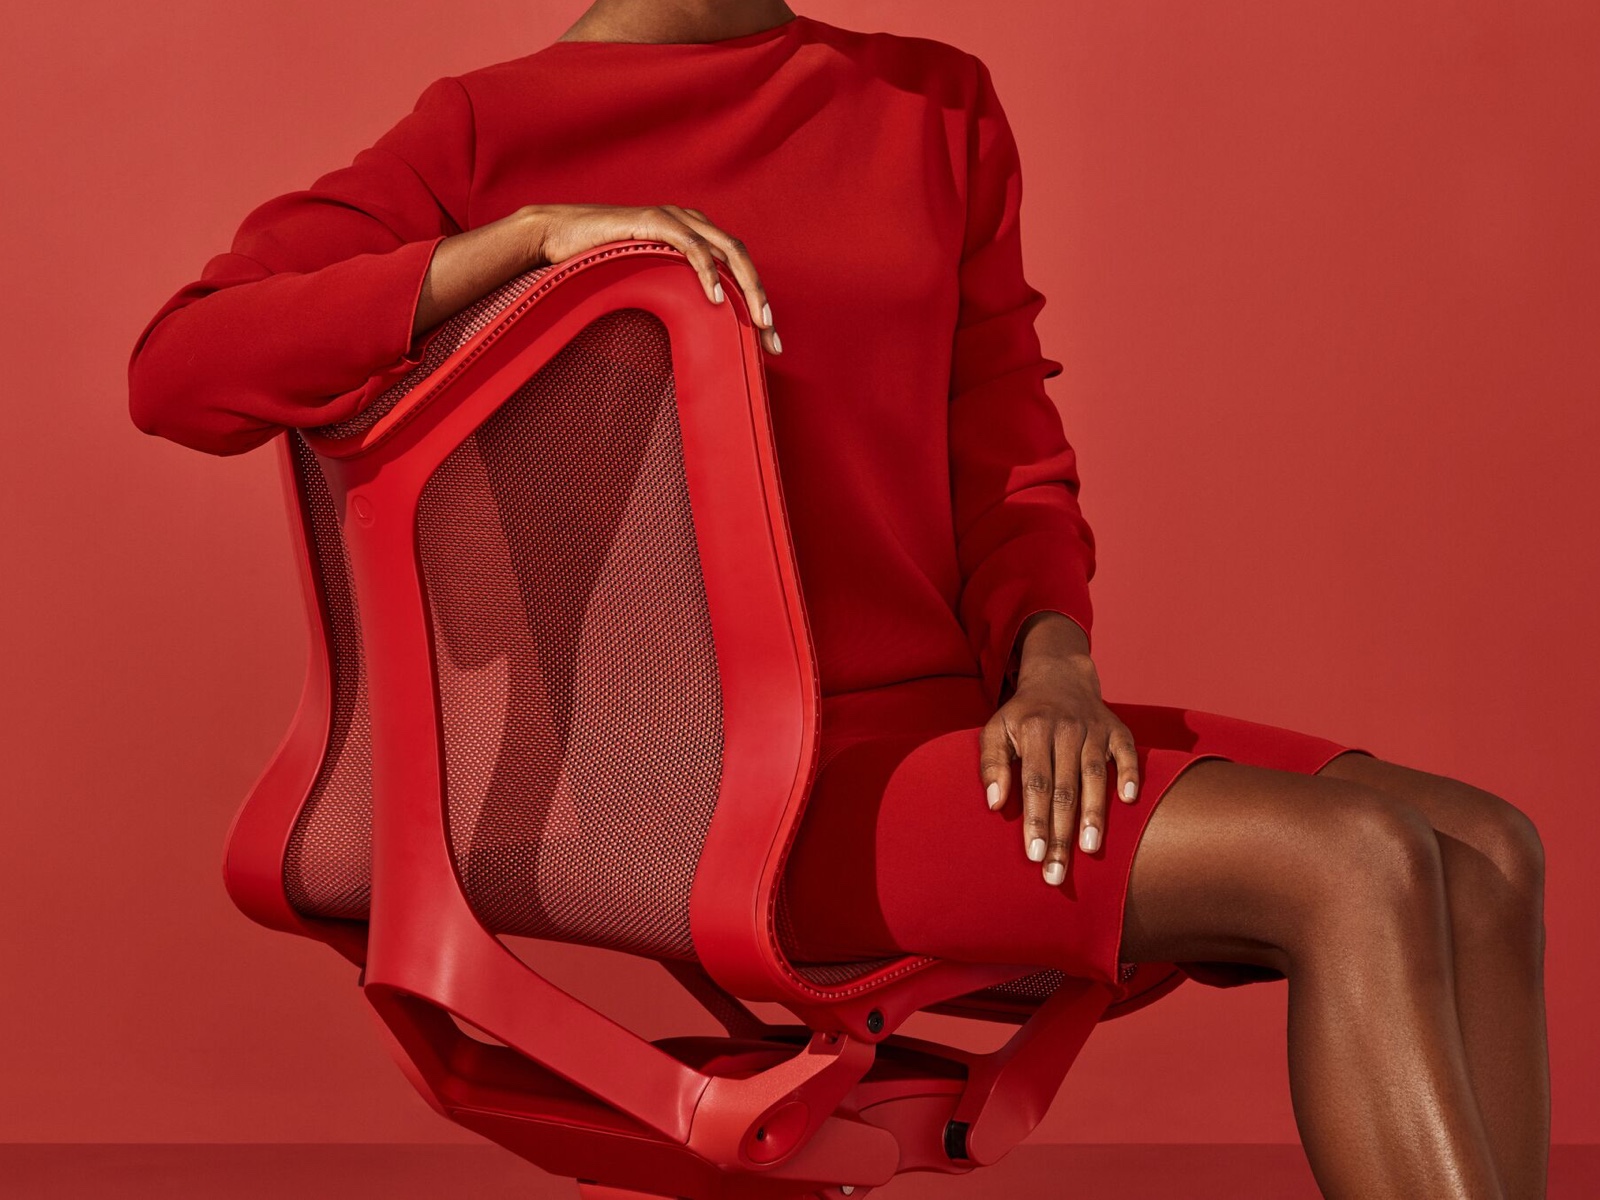 A woman in a red dress sits in a low-back Cosm Chair in Canyon red.